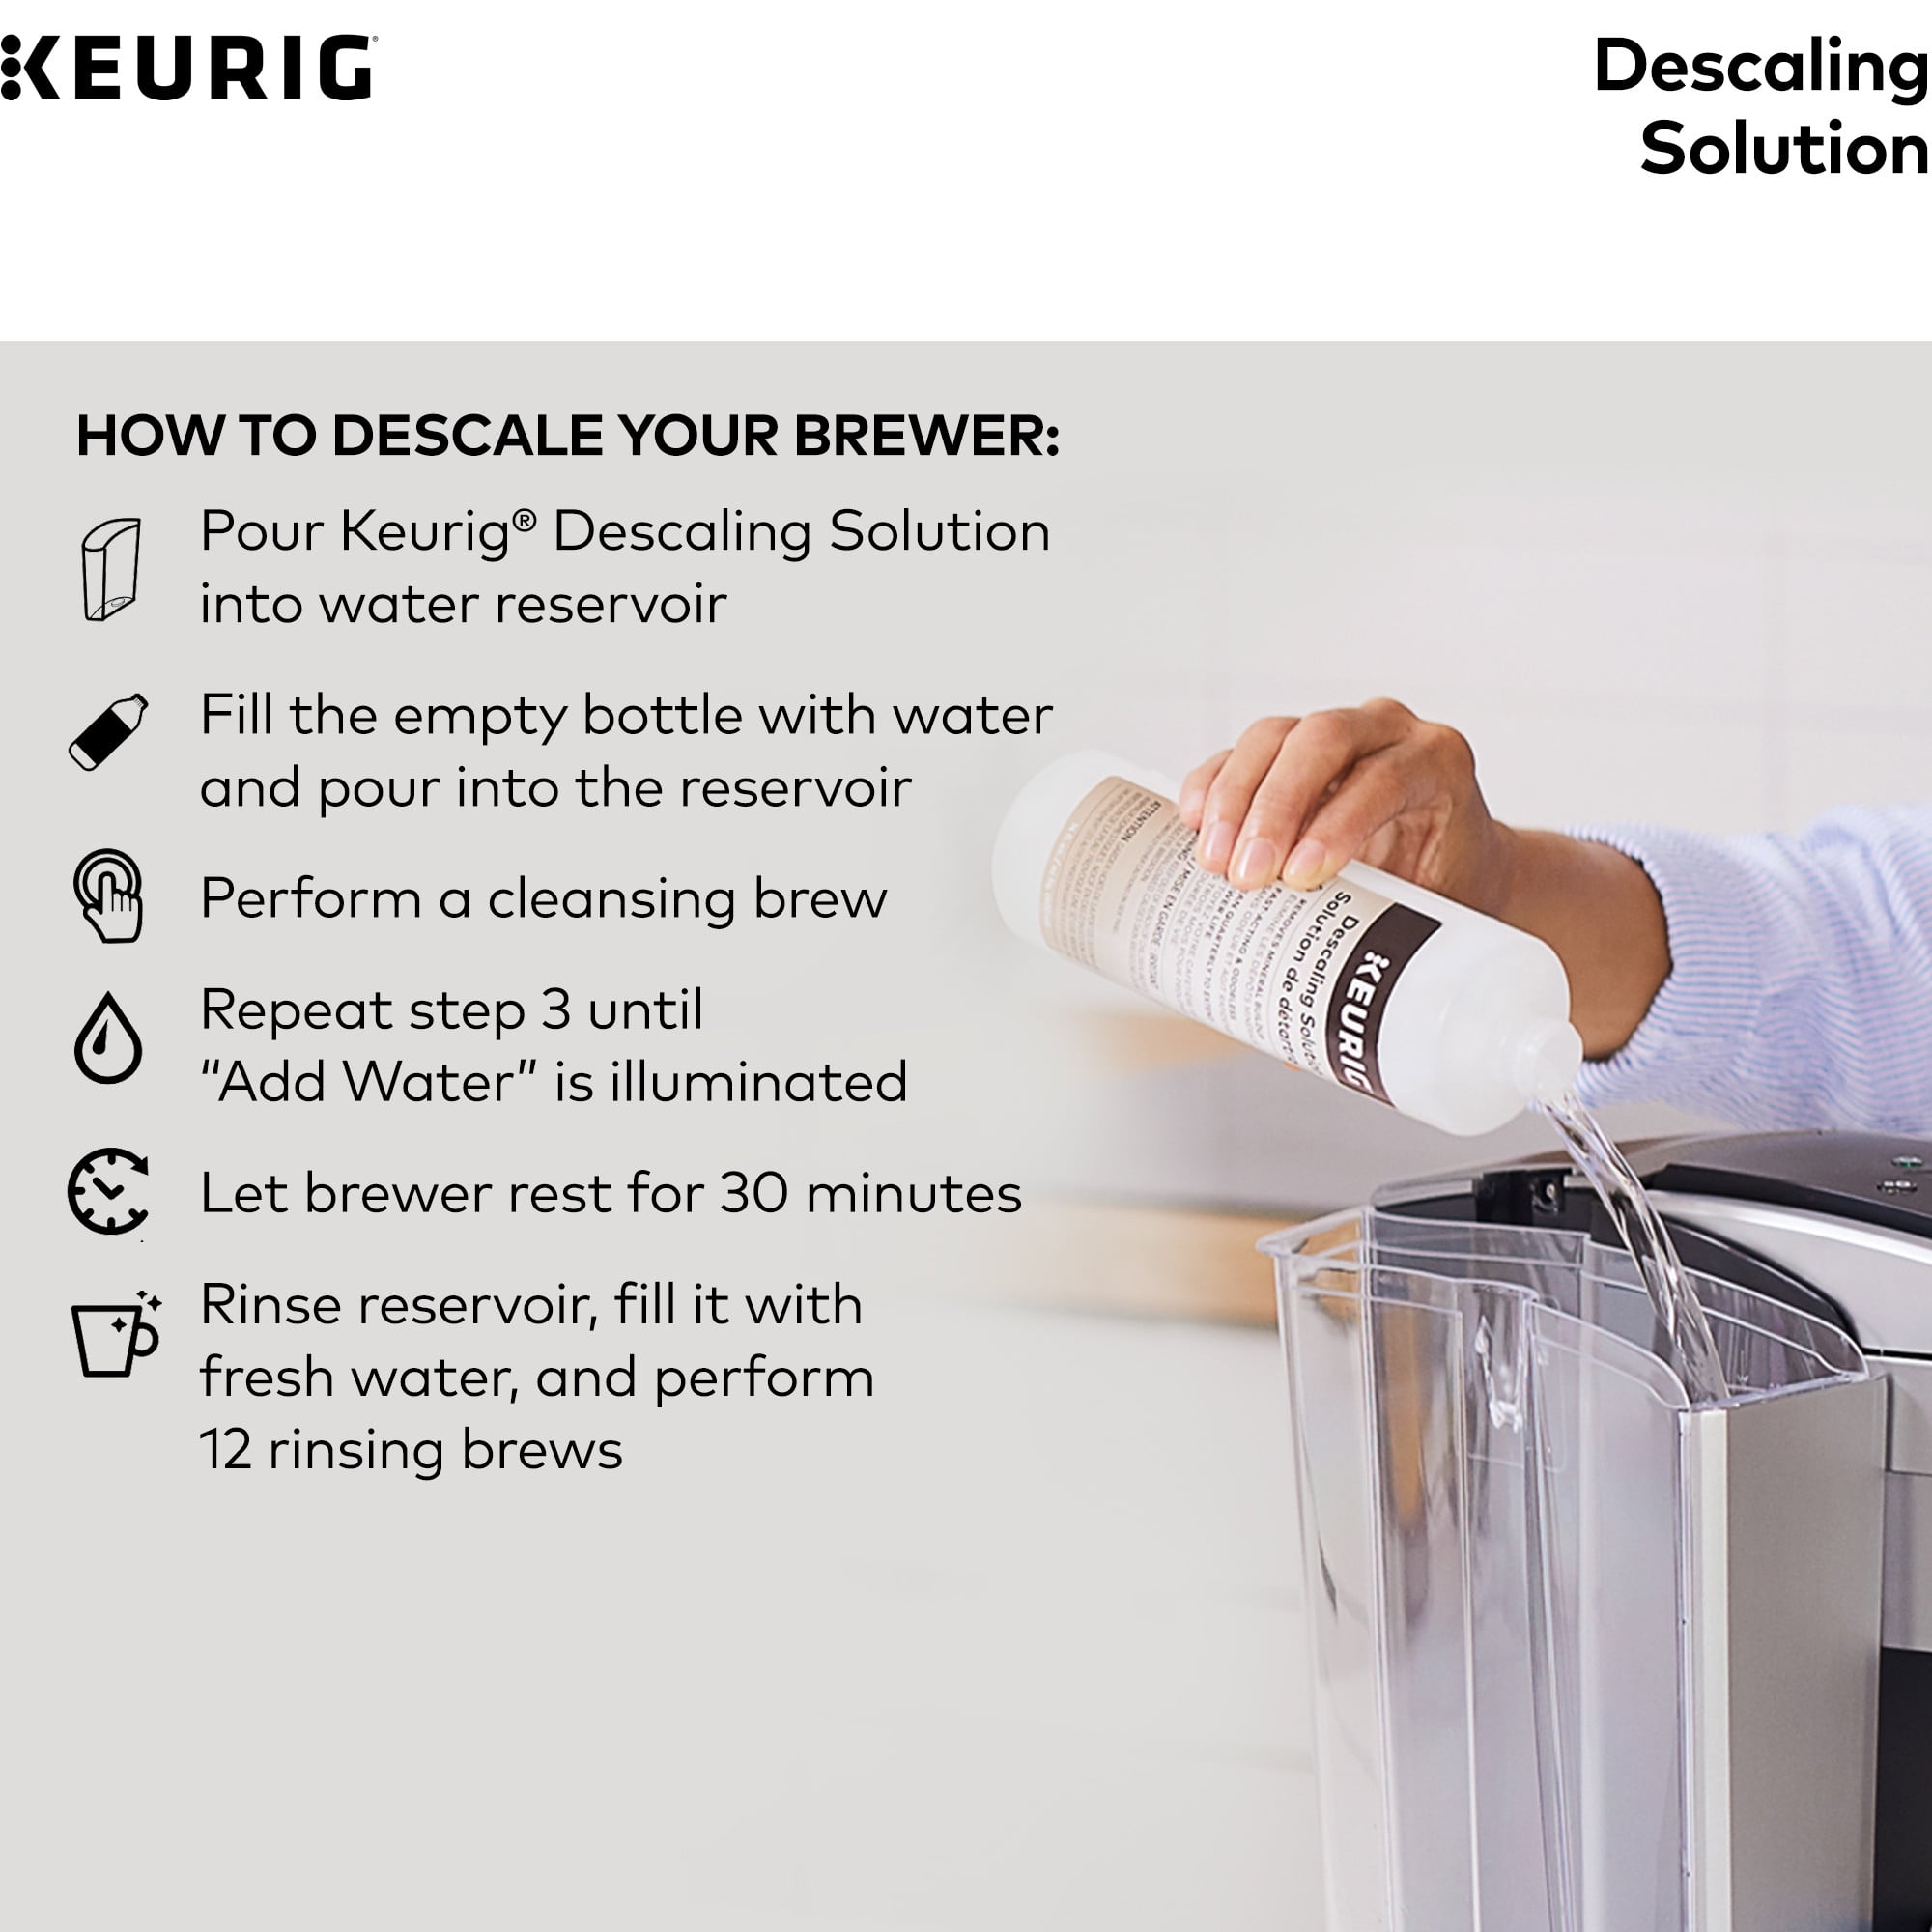 Professional Descaling Kit 2 in 1 Compatible With All K-Cup Keurig 2.0 –  Sollowellness